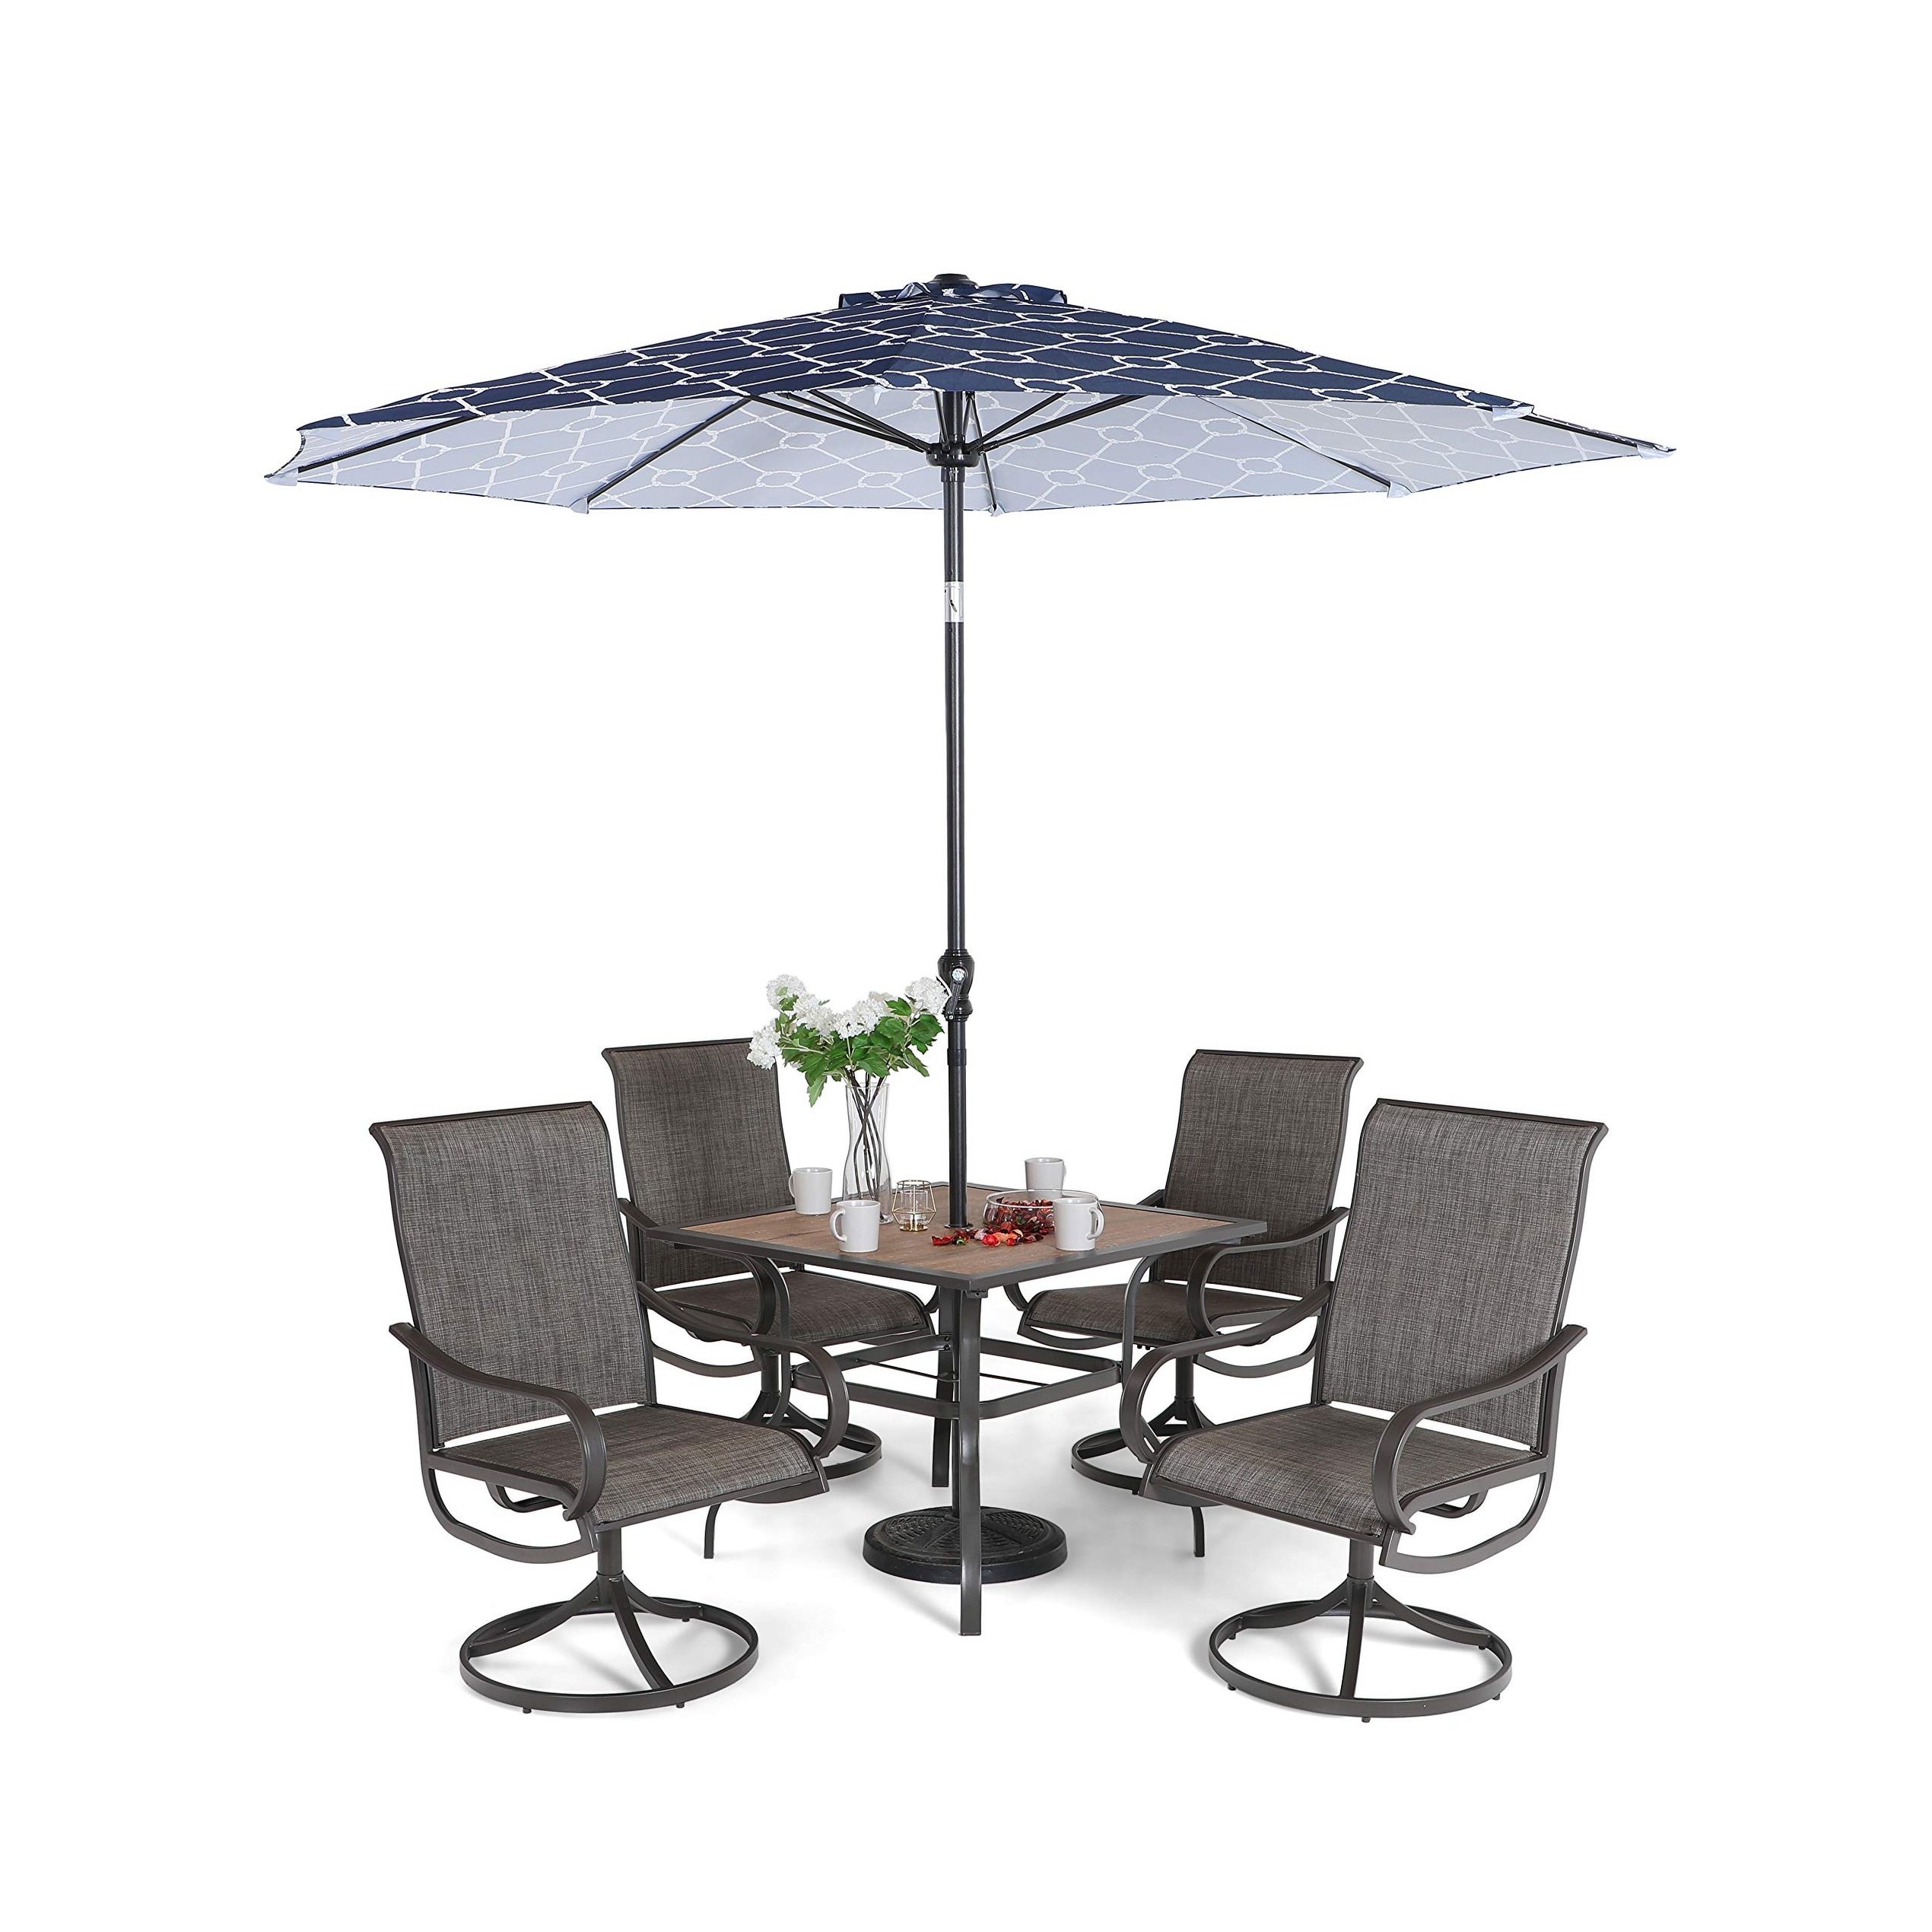 Sophia & William Patio Dining Set 7 Pieces Outdoor Furniture Table and Chairs Metal 6 x Swivel Dining Chairs Textilene with 1 Wood Like Umbrella Table for Lawn Pool Garden Porch 